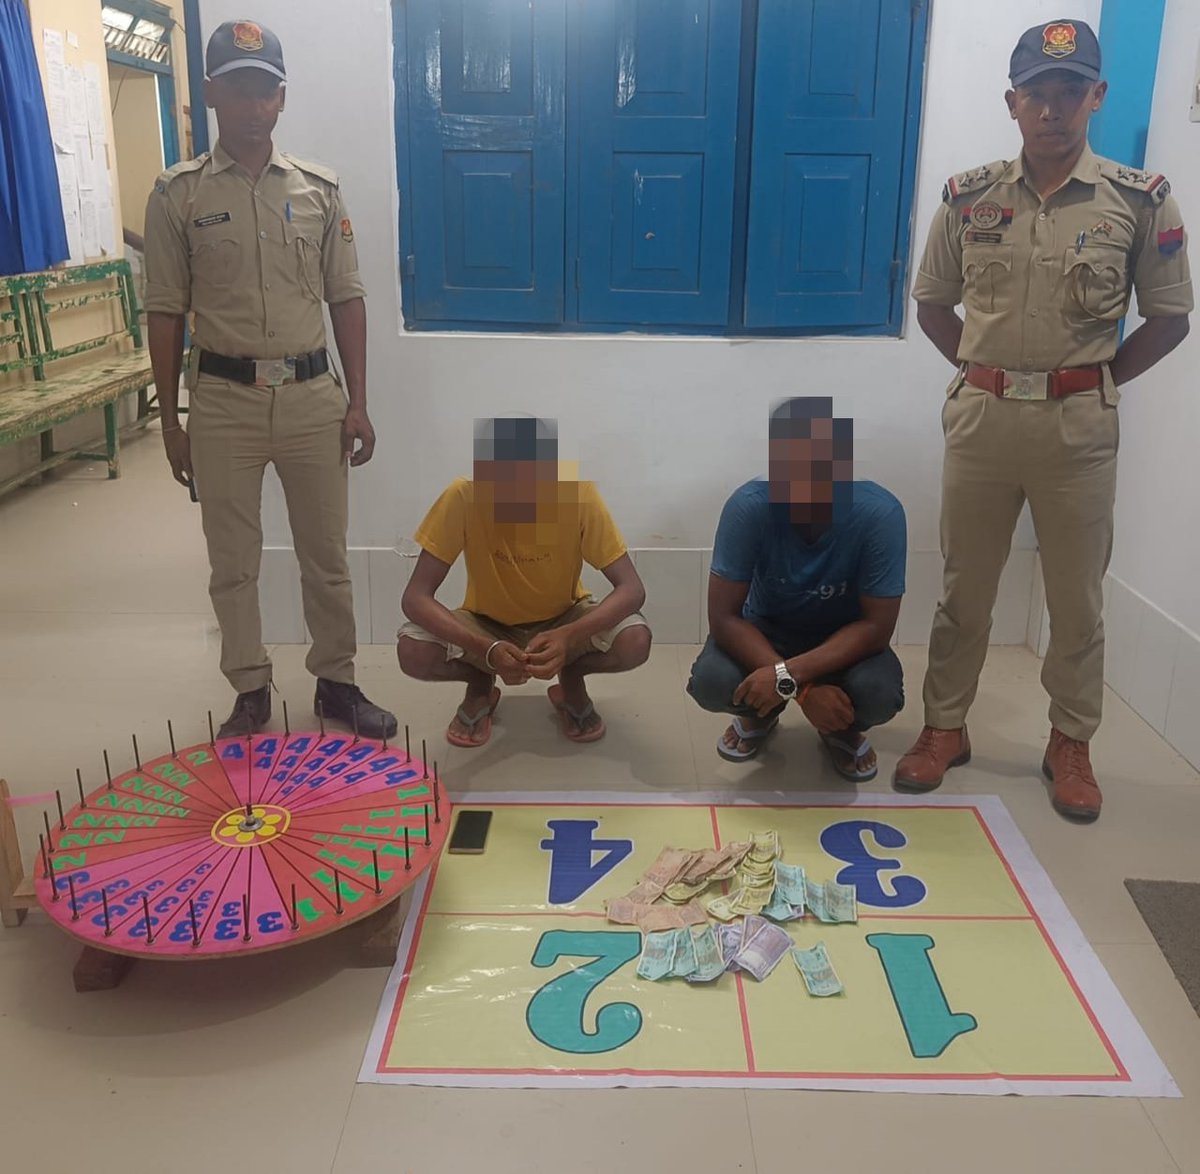 Khowai PS conducted gambling raid in the Charak Mela of South Jambura , Kabiguru School Ground and arrested the above two gamblers and also seized Cash Rs 2080/- with gambling Articles US -12 TG Act.
@ceotripura 
@tripura_cmo 
@Tripura_Police 
@dmkhowai